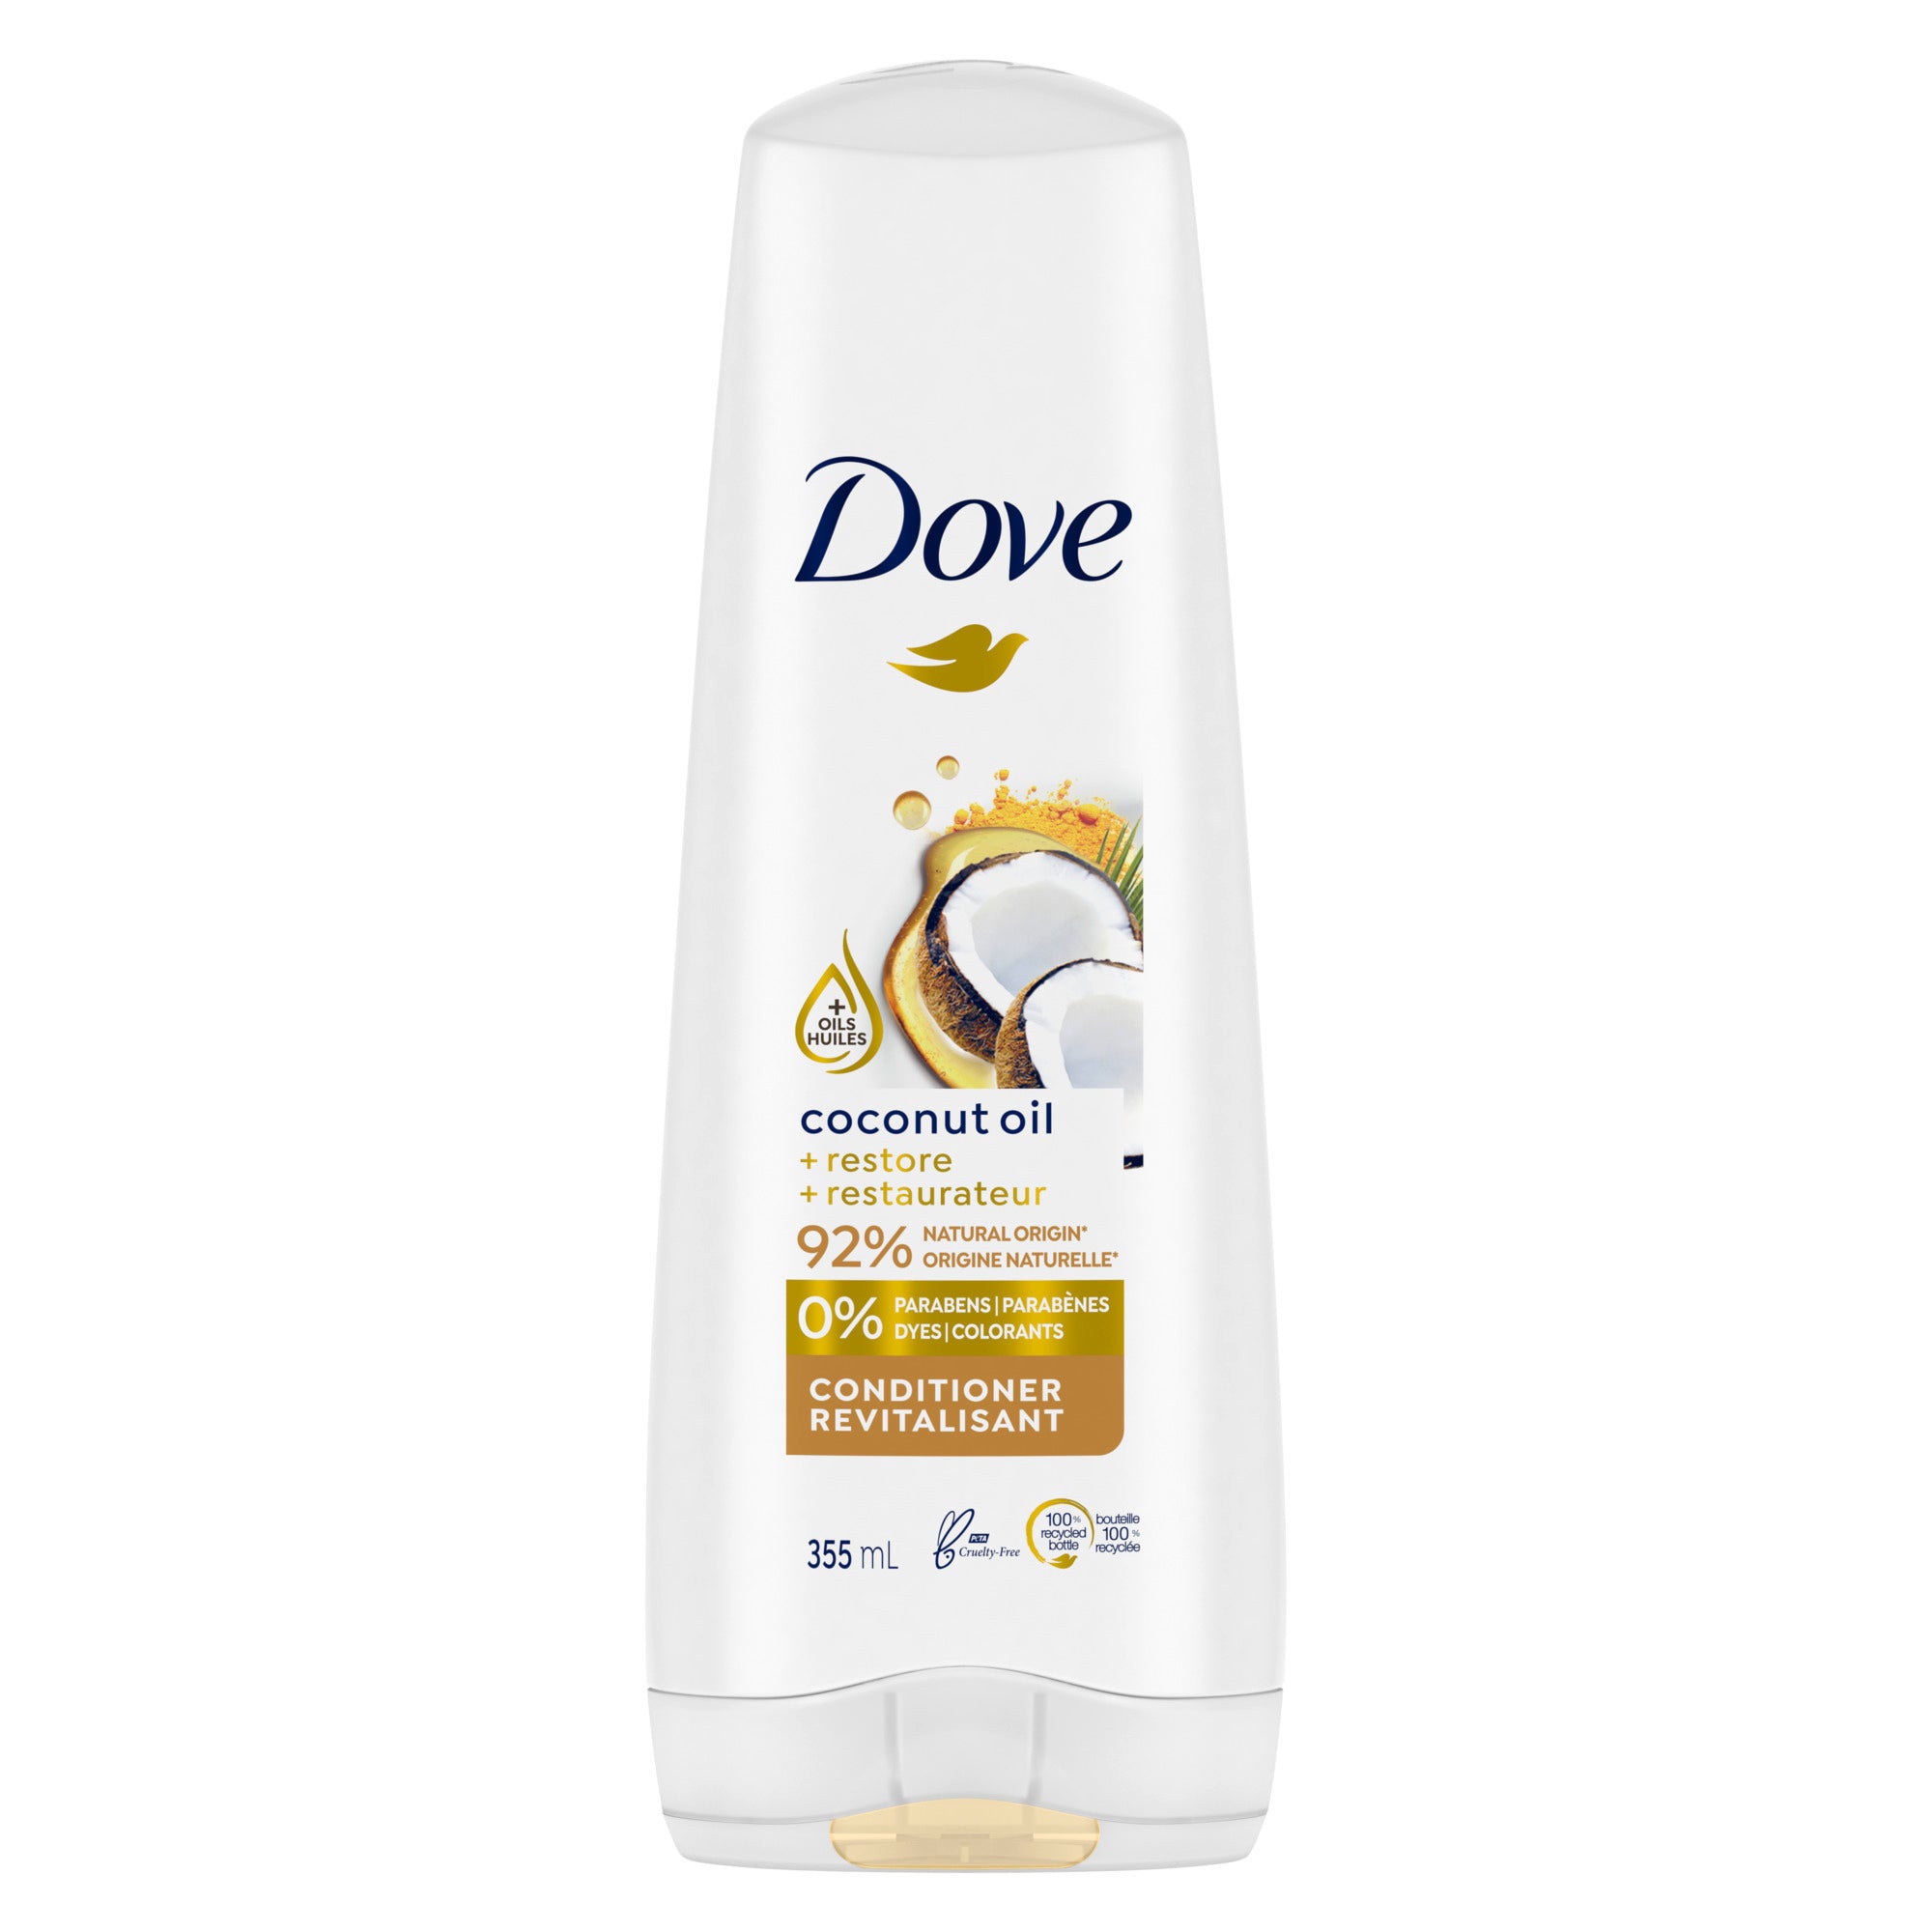 Showing the front angle view of the Dove Nourishing Secrets Coconut Oil Conditioner 355mL product.